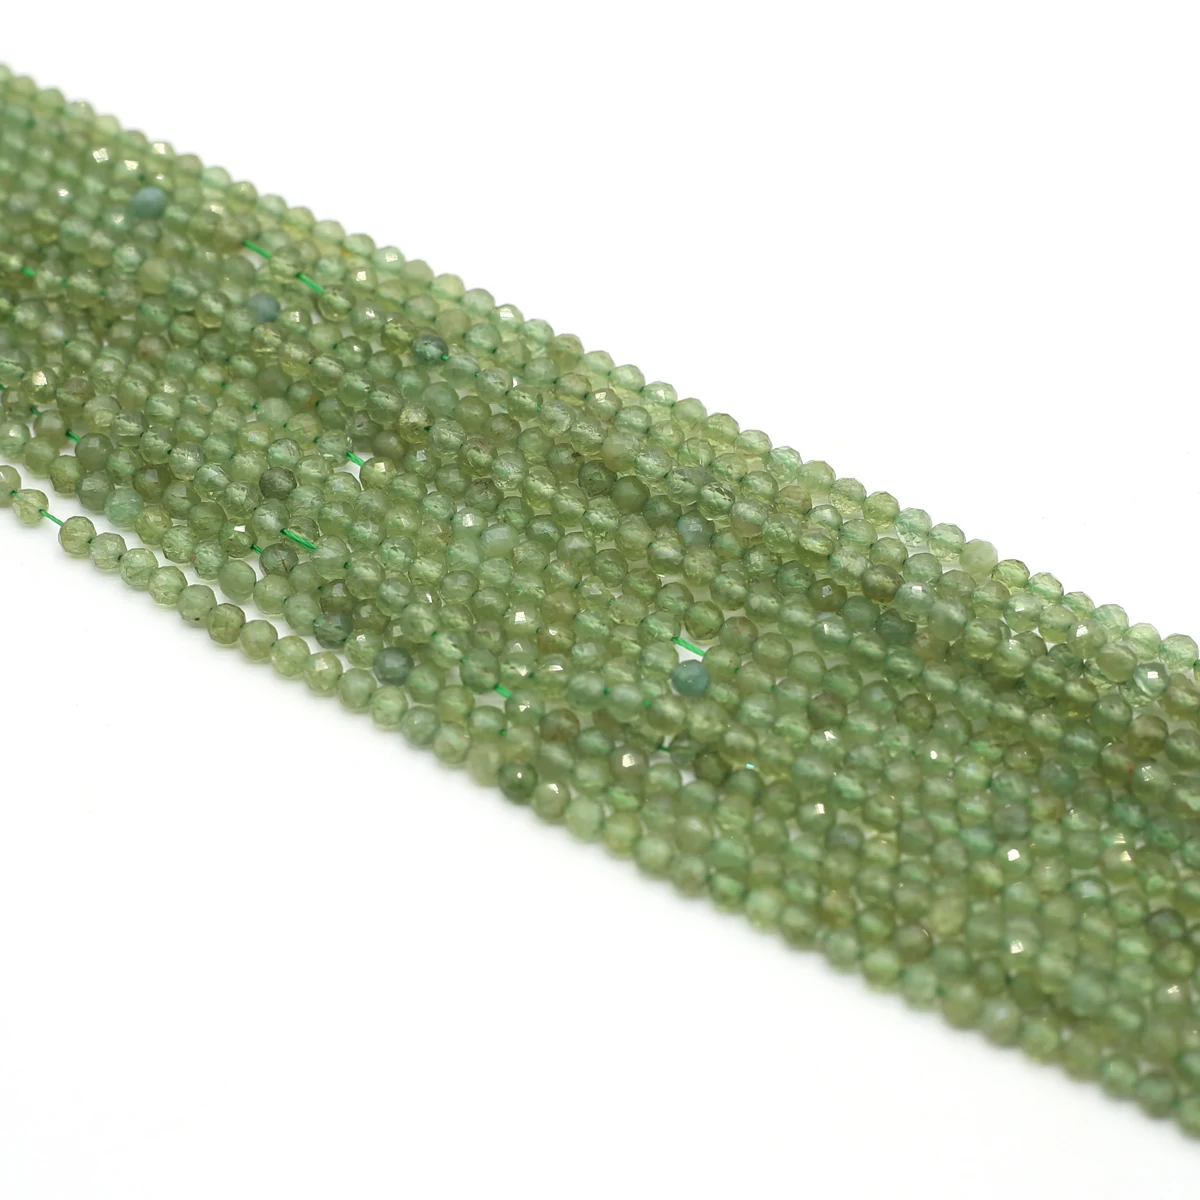 Купи 4mm Faceted Natural Stone Round Green Apatite Loose Spacer Beads for Jewelry Making DIY Bracelet Necklace Accessories Wholesale за 313 рублей в магазине AliExpress